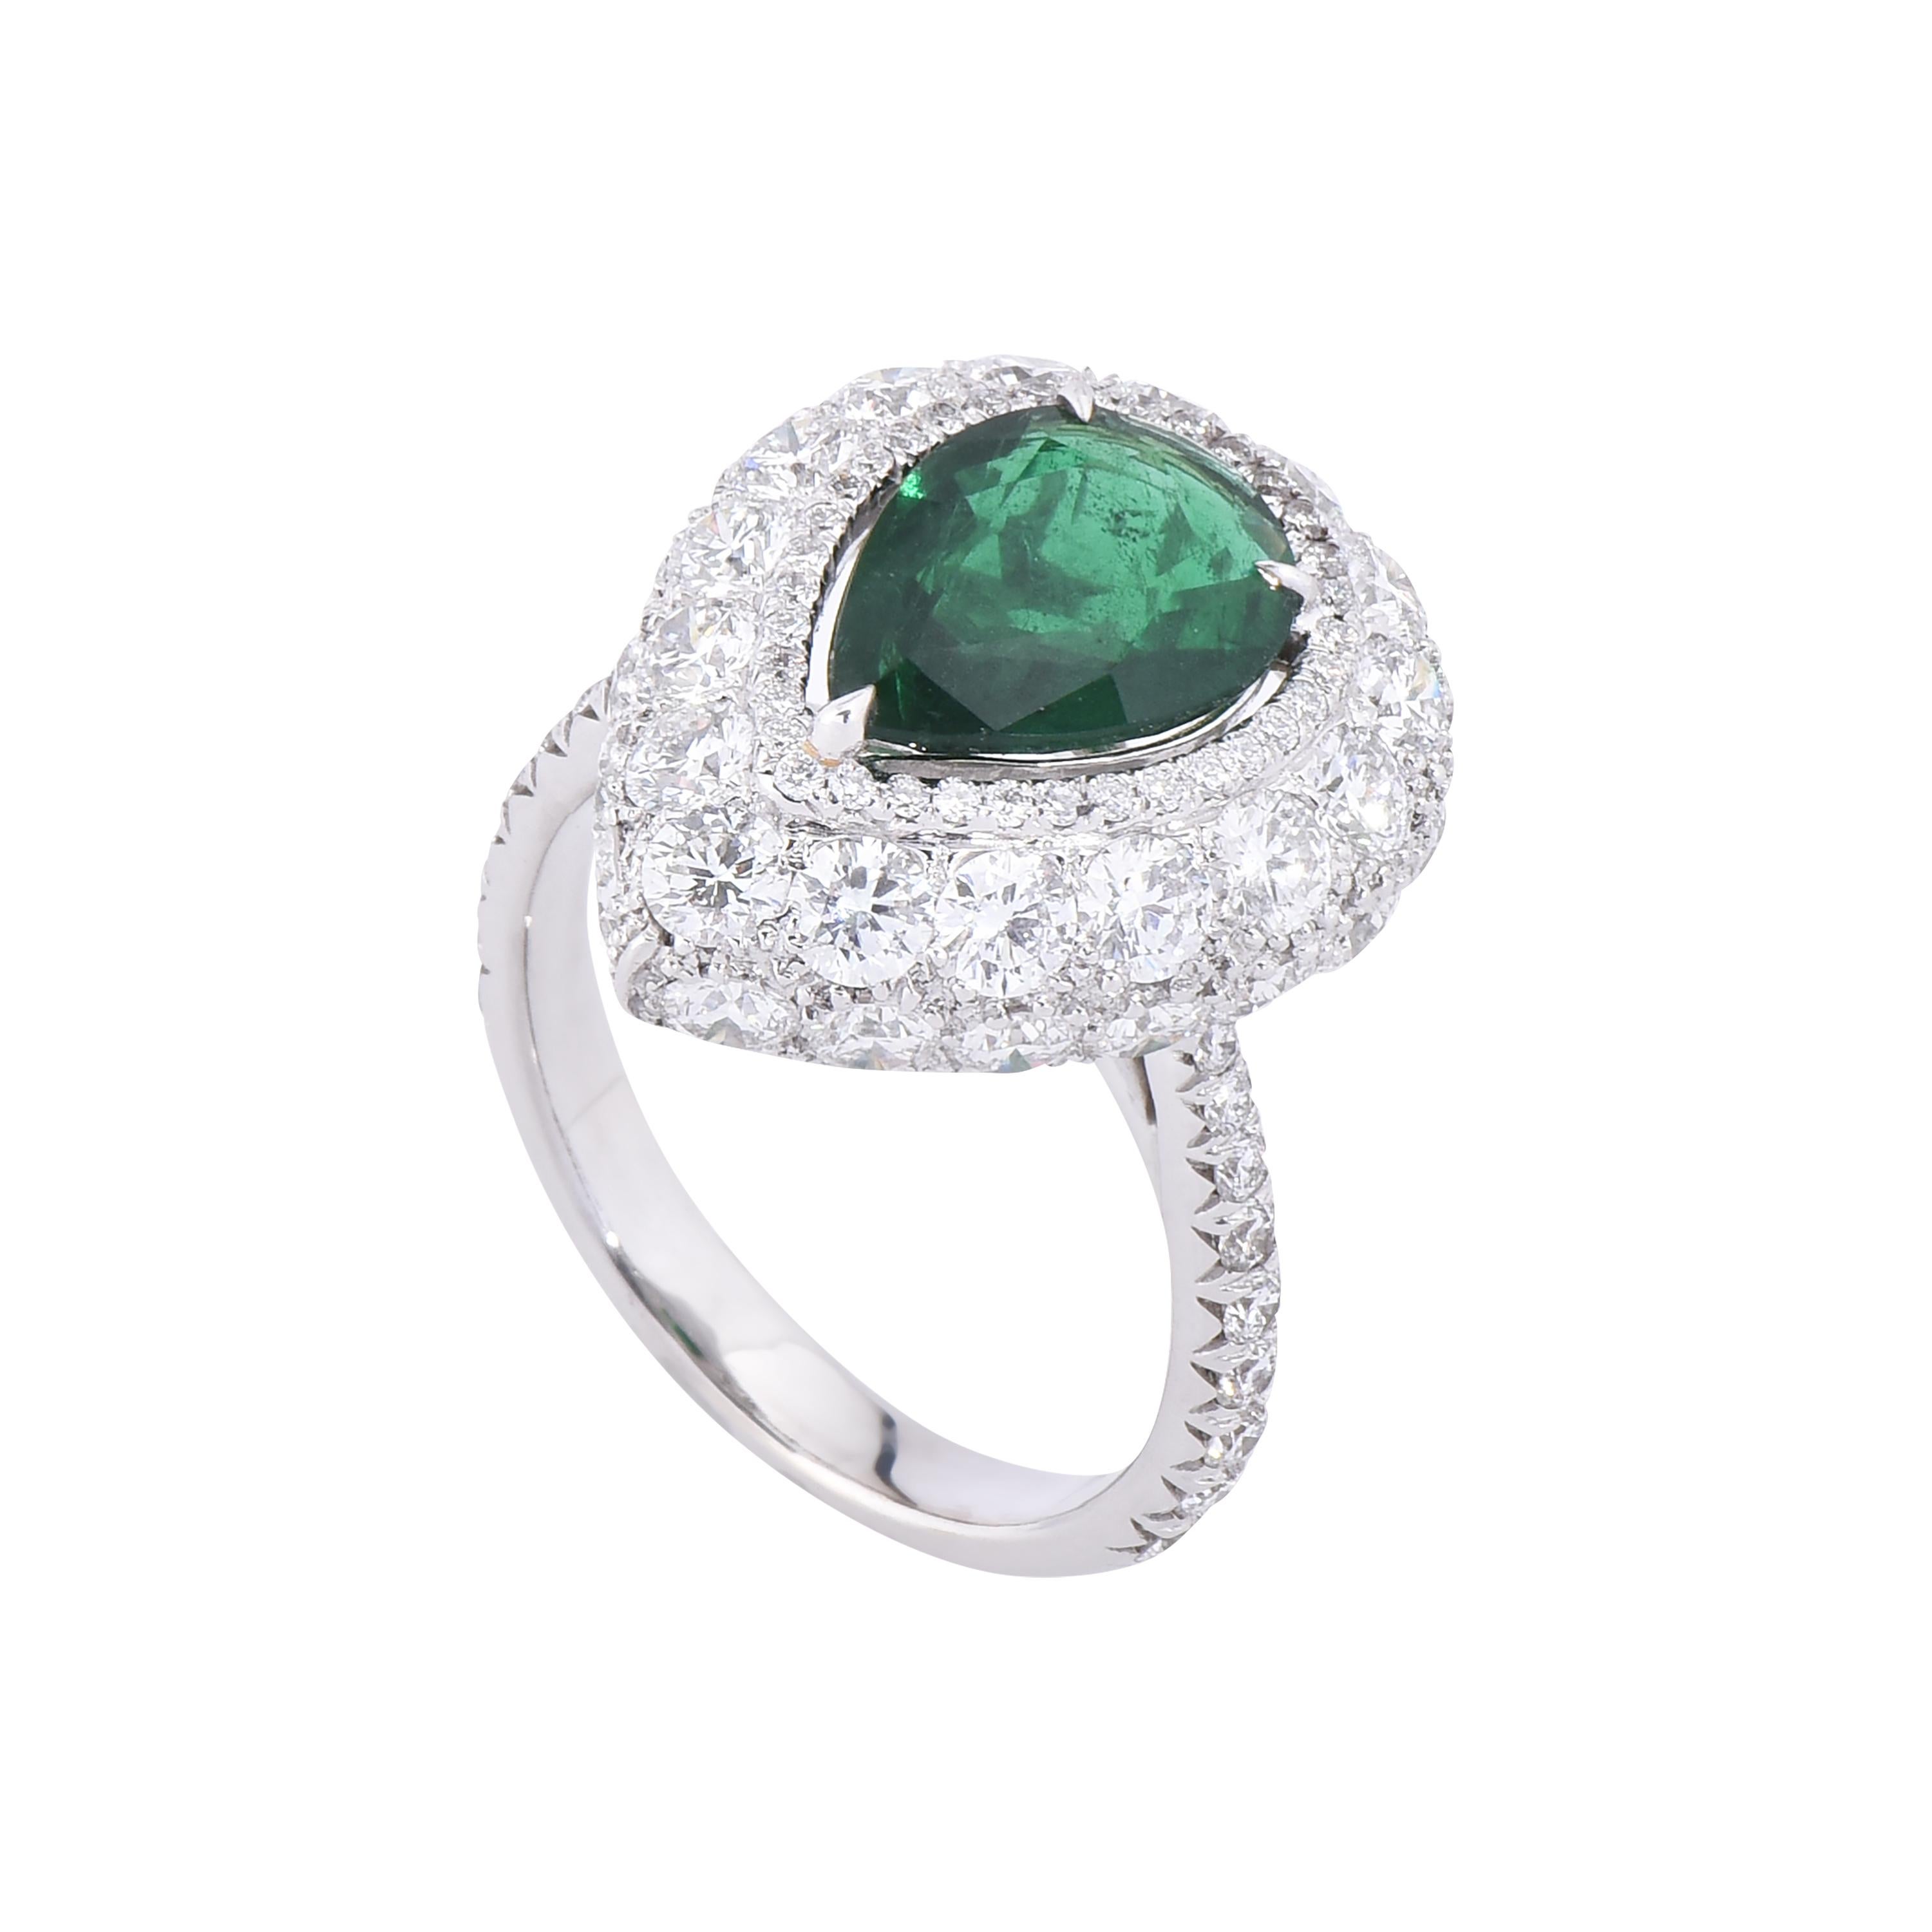 A stunning 18 karat white gold emerald ring from the Viridian collection of Laviere. The ring is set with a GIA certified 1.87 carats Zambian pear shape emerald and 3.58 carats round brilliant diamonds.
Gold Weight 7.04 grams. Diamond Clarity VS-SI.